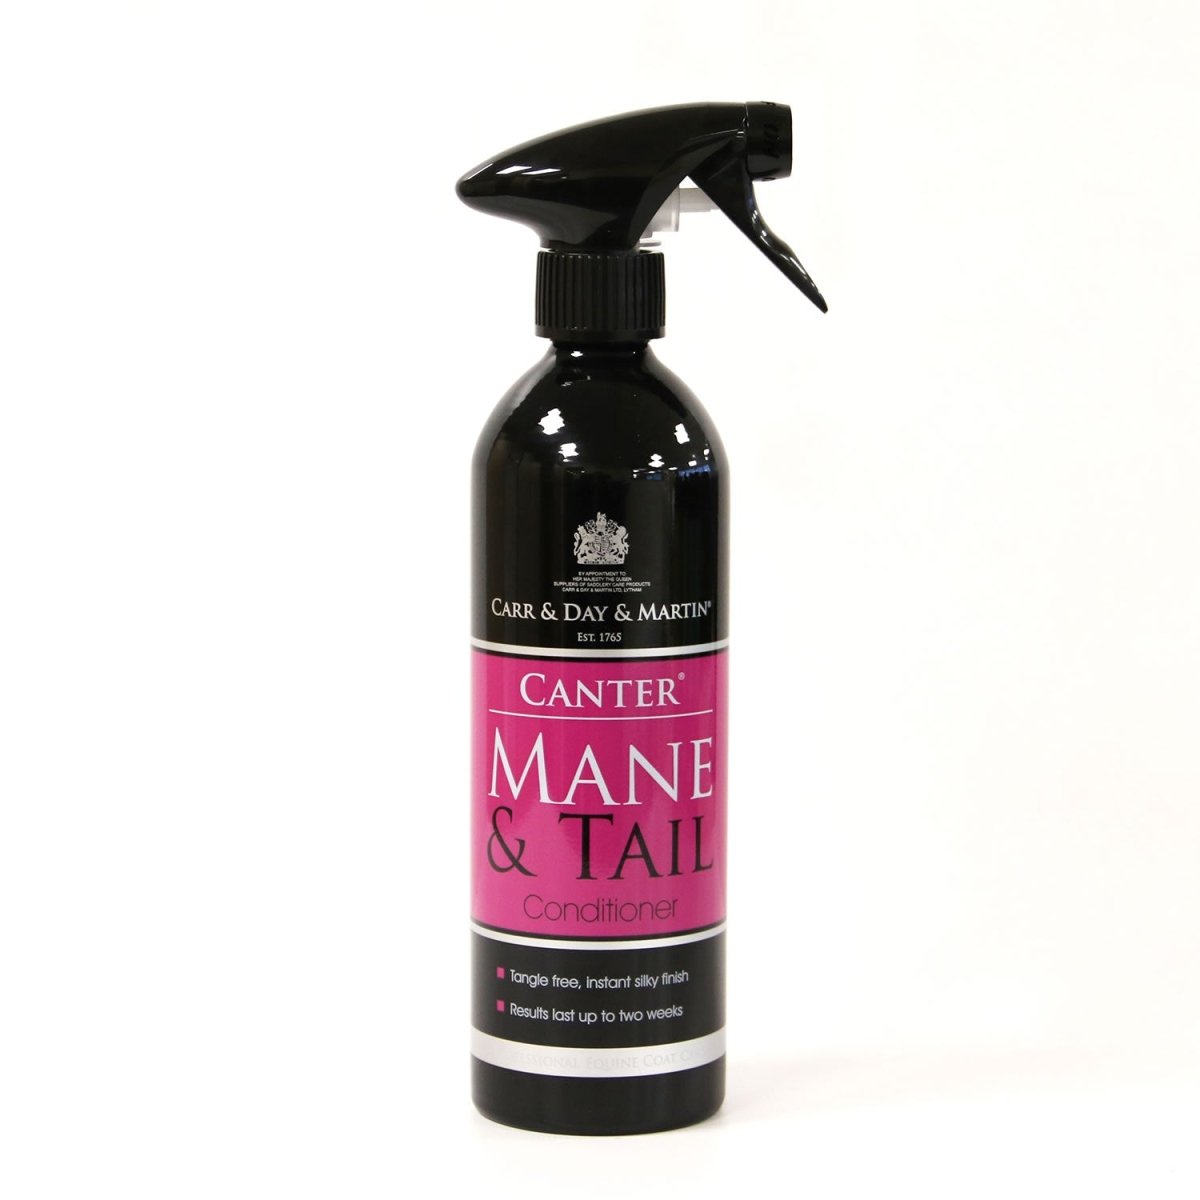 Carr & Day & Martin Canter Mane & Tail Conditioner Spray - 500Ml -